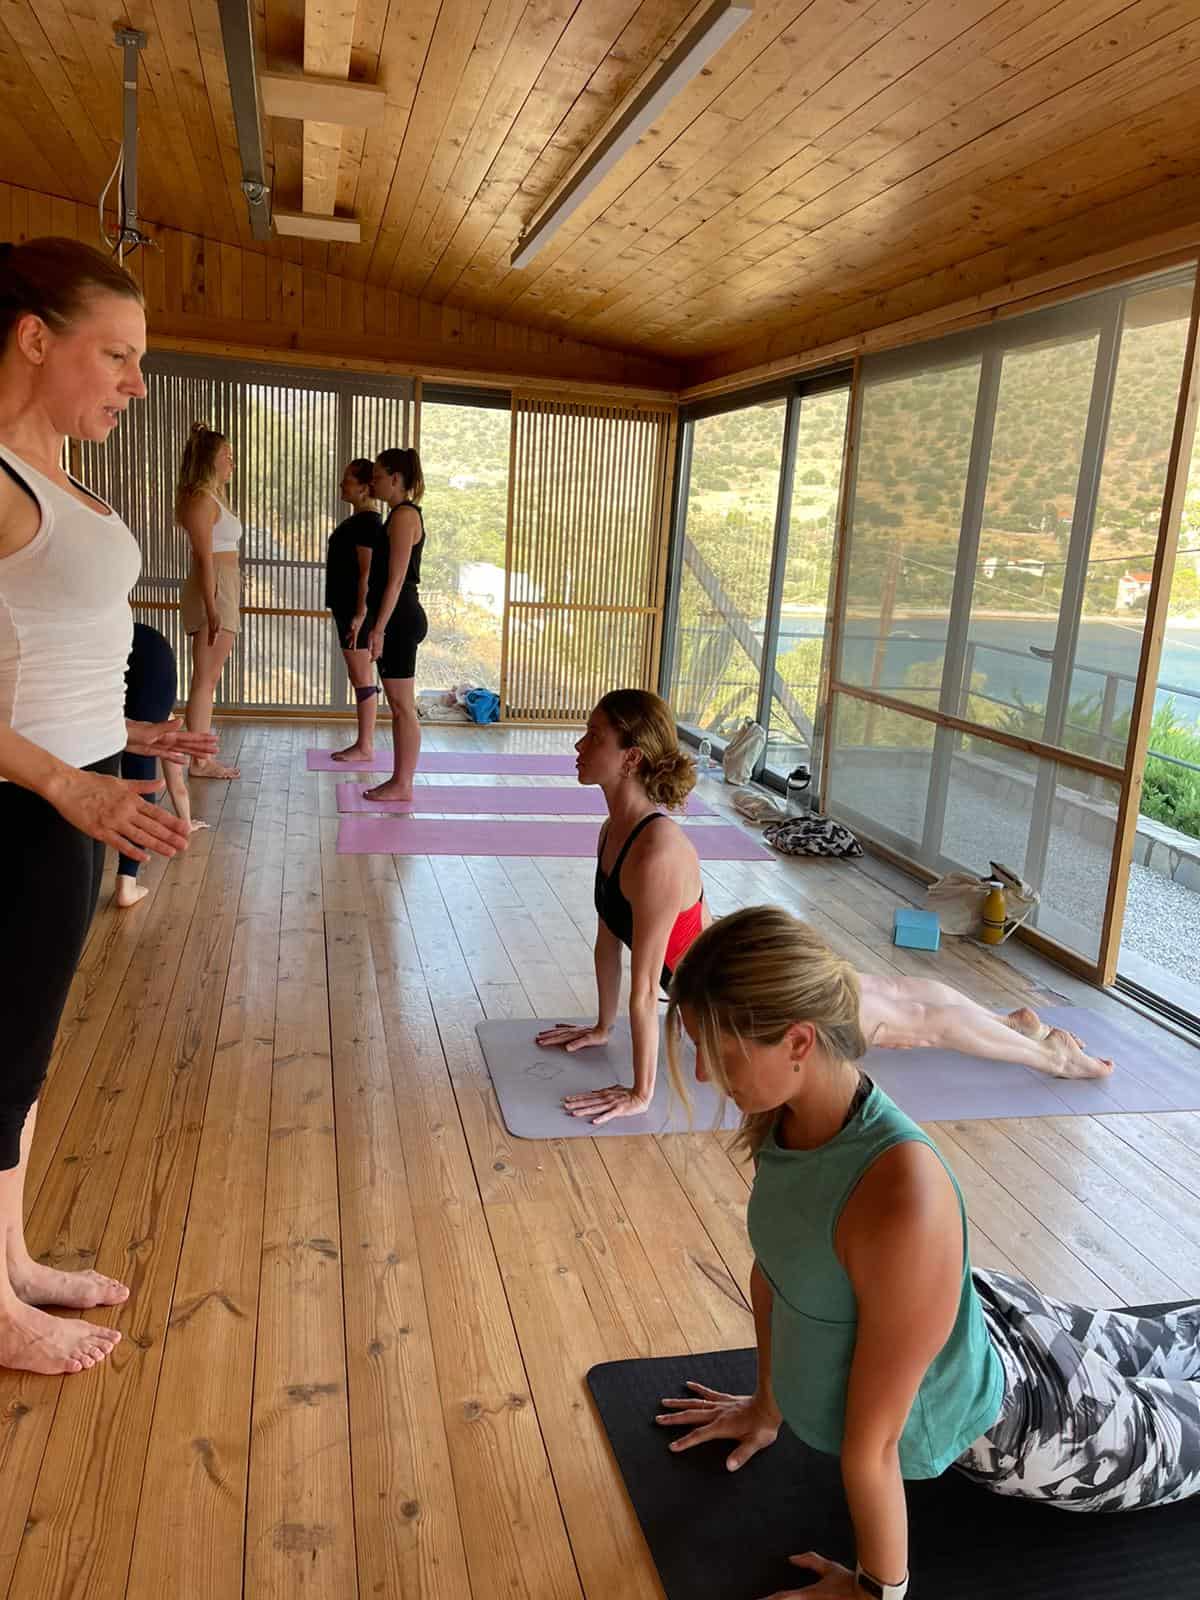 Yoga students practice their teaching skills in the studio during a yoga teacher training course